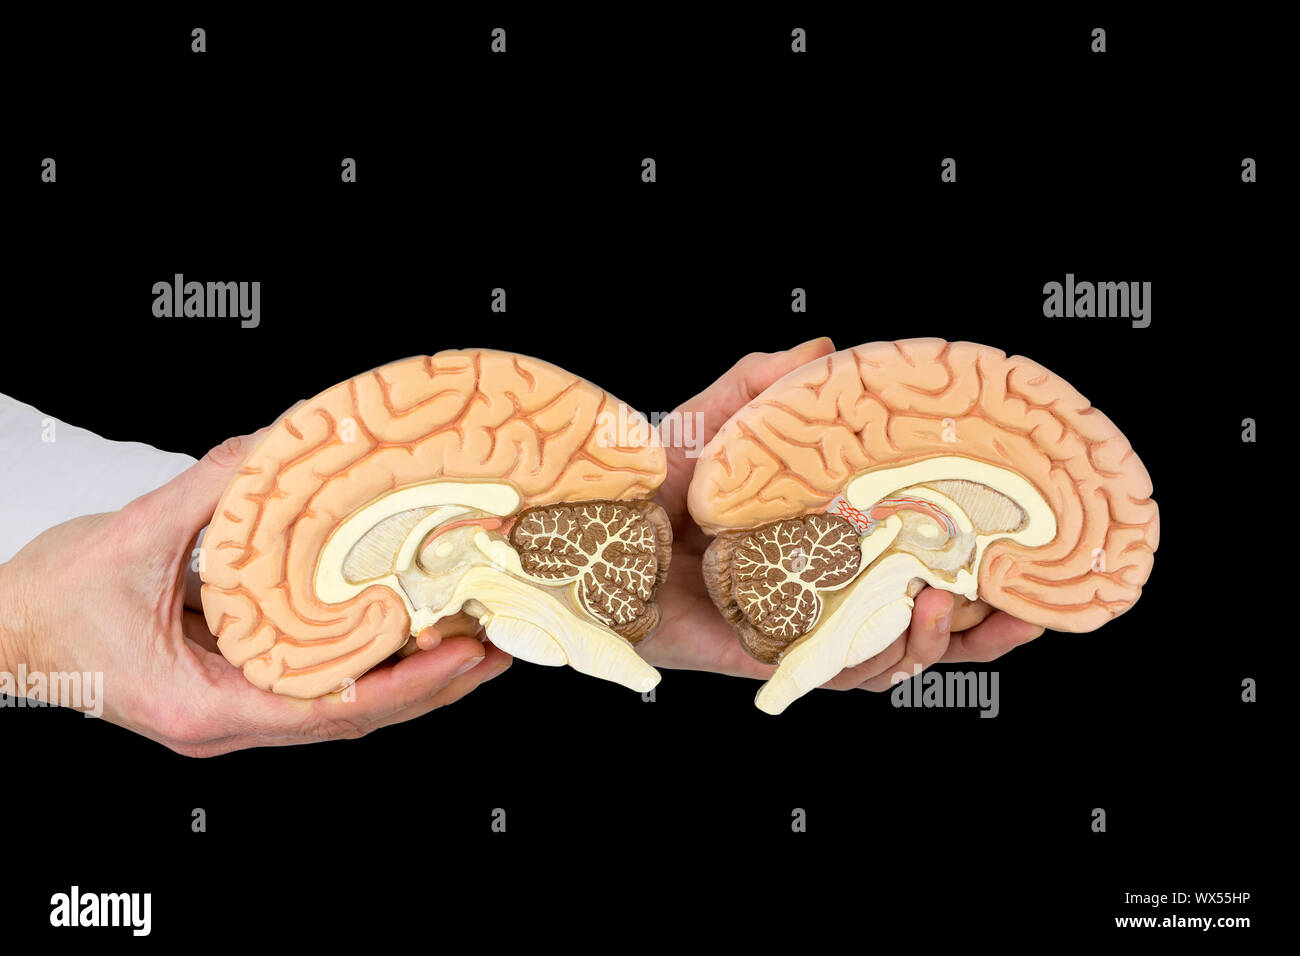 Hands holding model human brains on black background Stock Photo